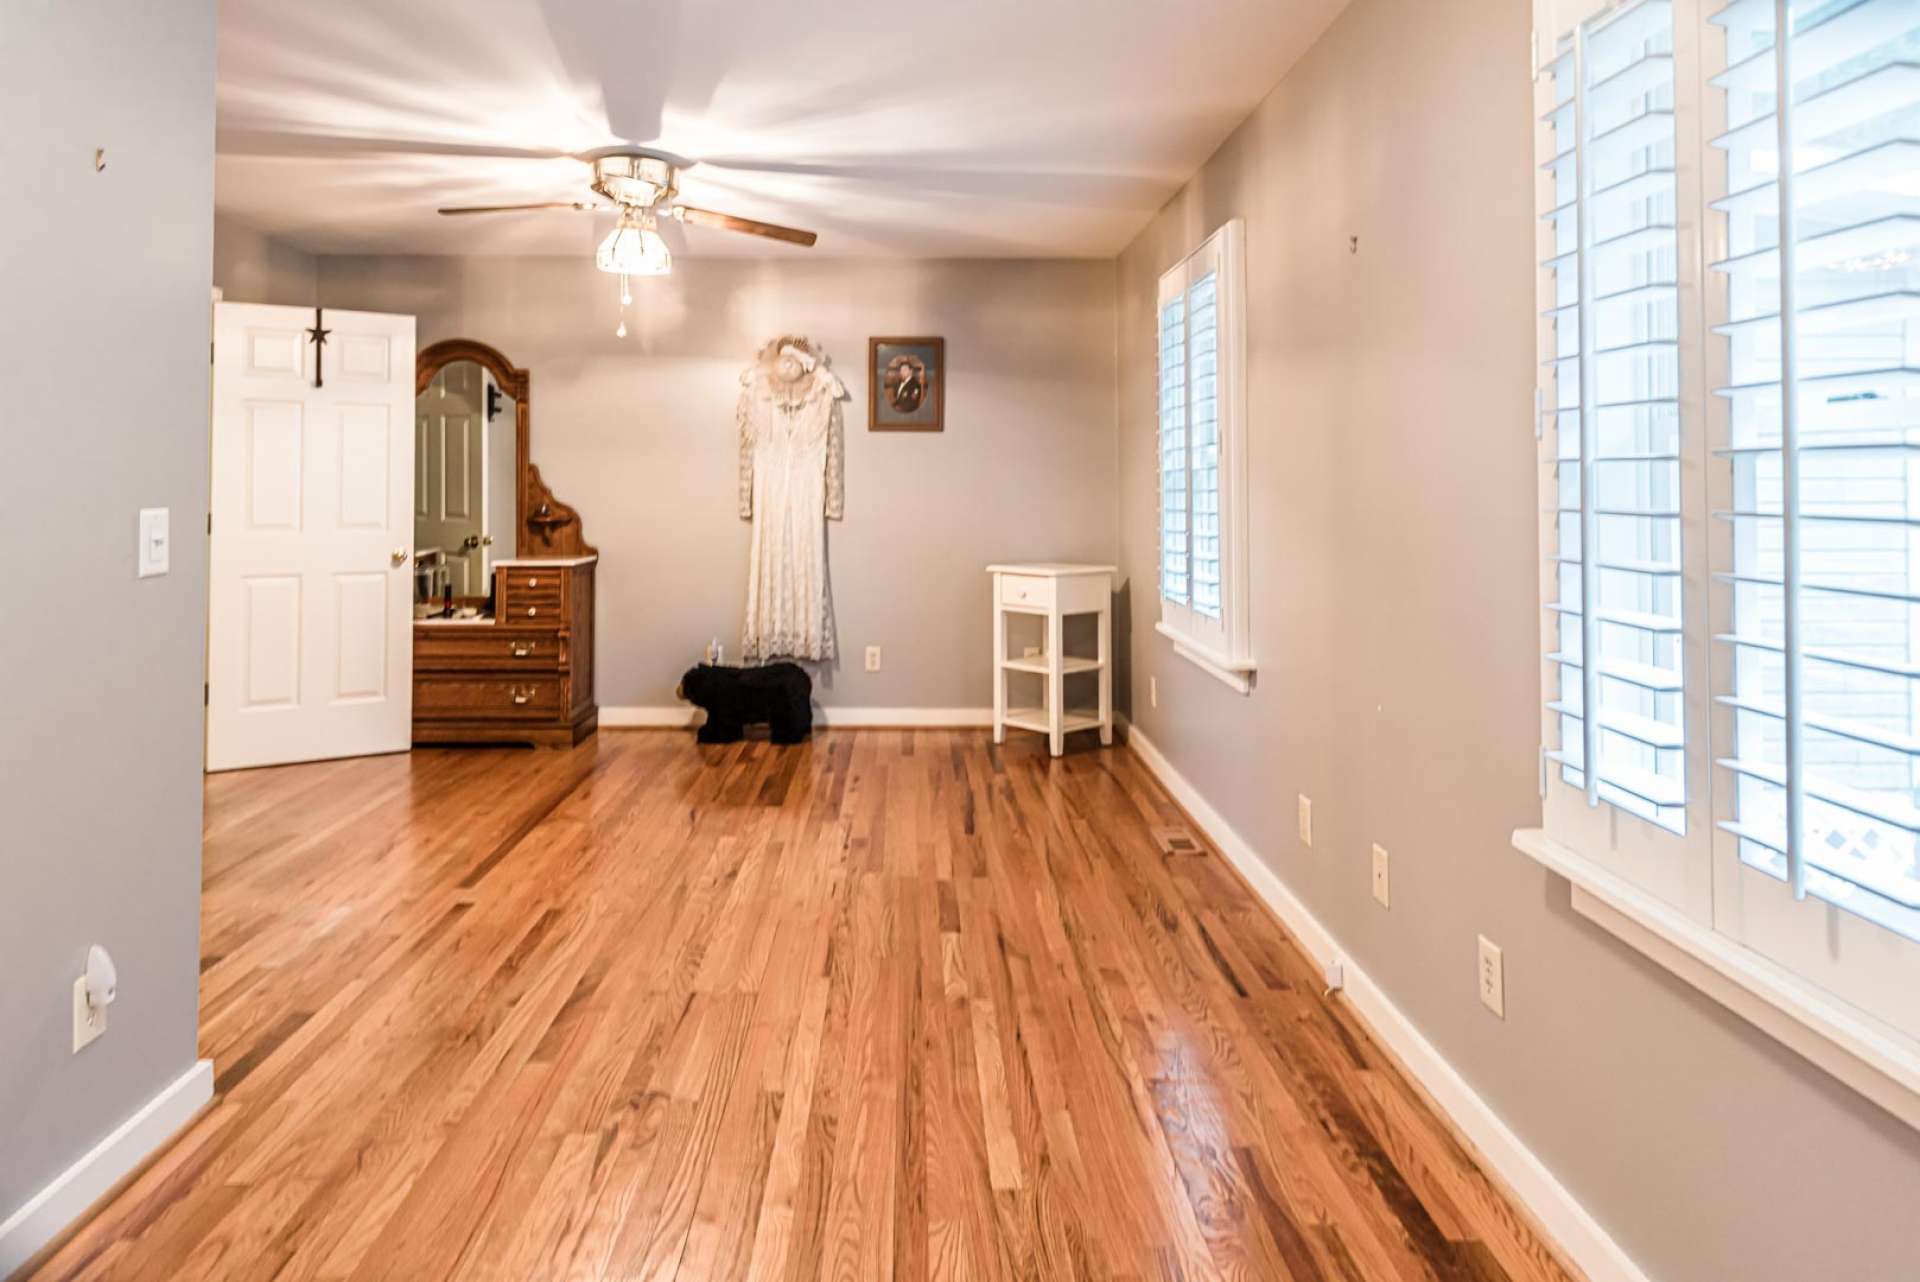 The master bedroom features gleaming wood floors, lots of windows, and a private master bath.